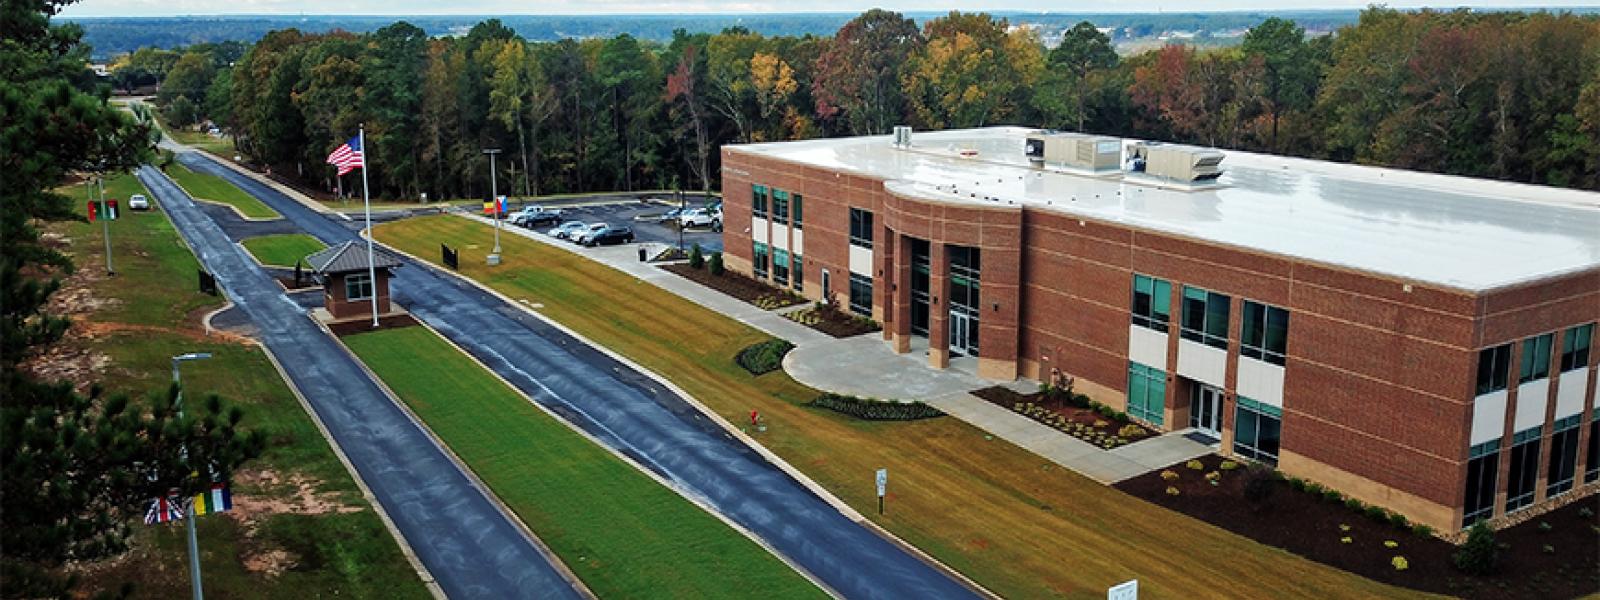 The William H. Jones Global Business & IT Center stands at the entrance to CIU just off Monticello Road